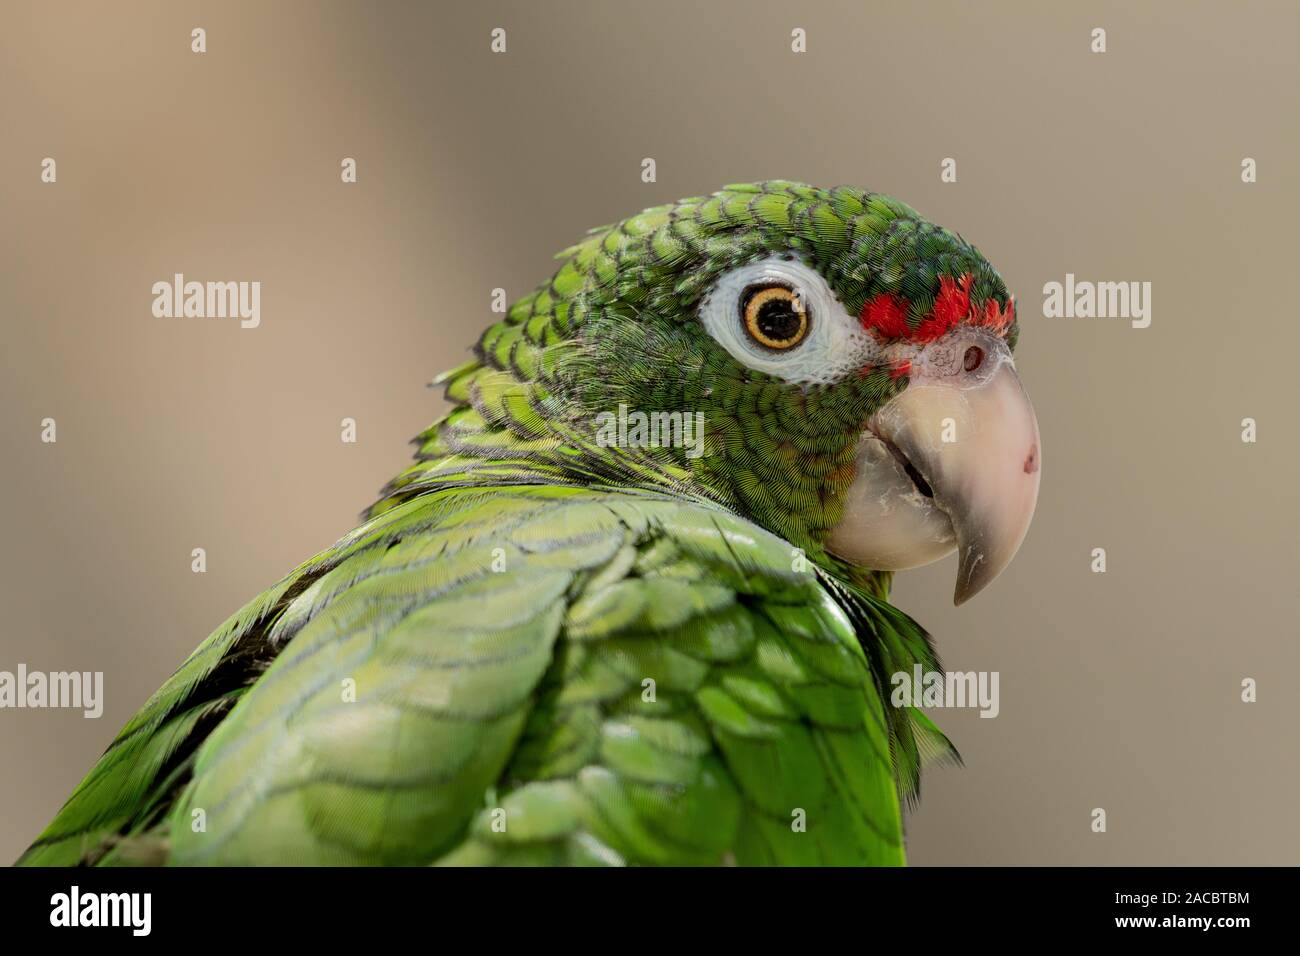 Puerto Rican Parrot (Amazona vittata), a Critically Endangered bird species, at conservation breeding facility, El Yunque National Forest, Puerto Rico Stock Photo